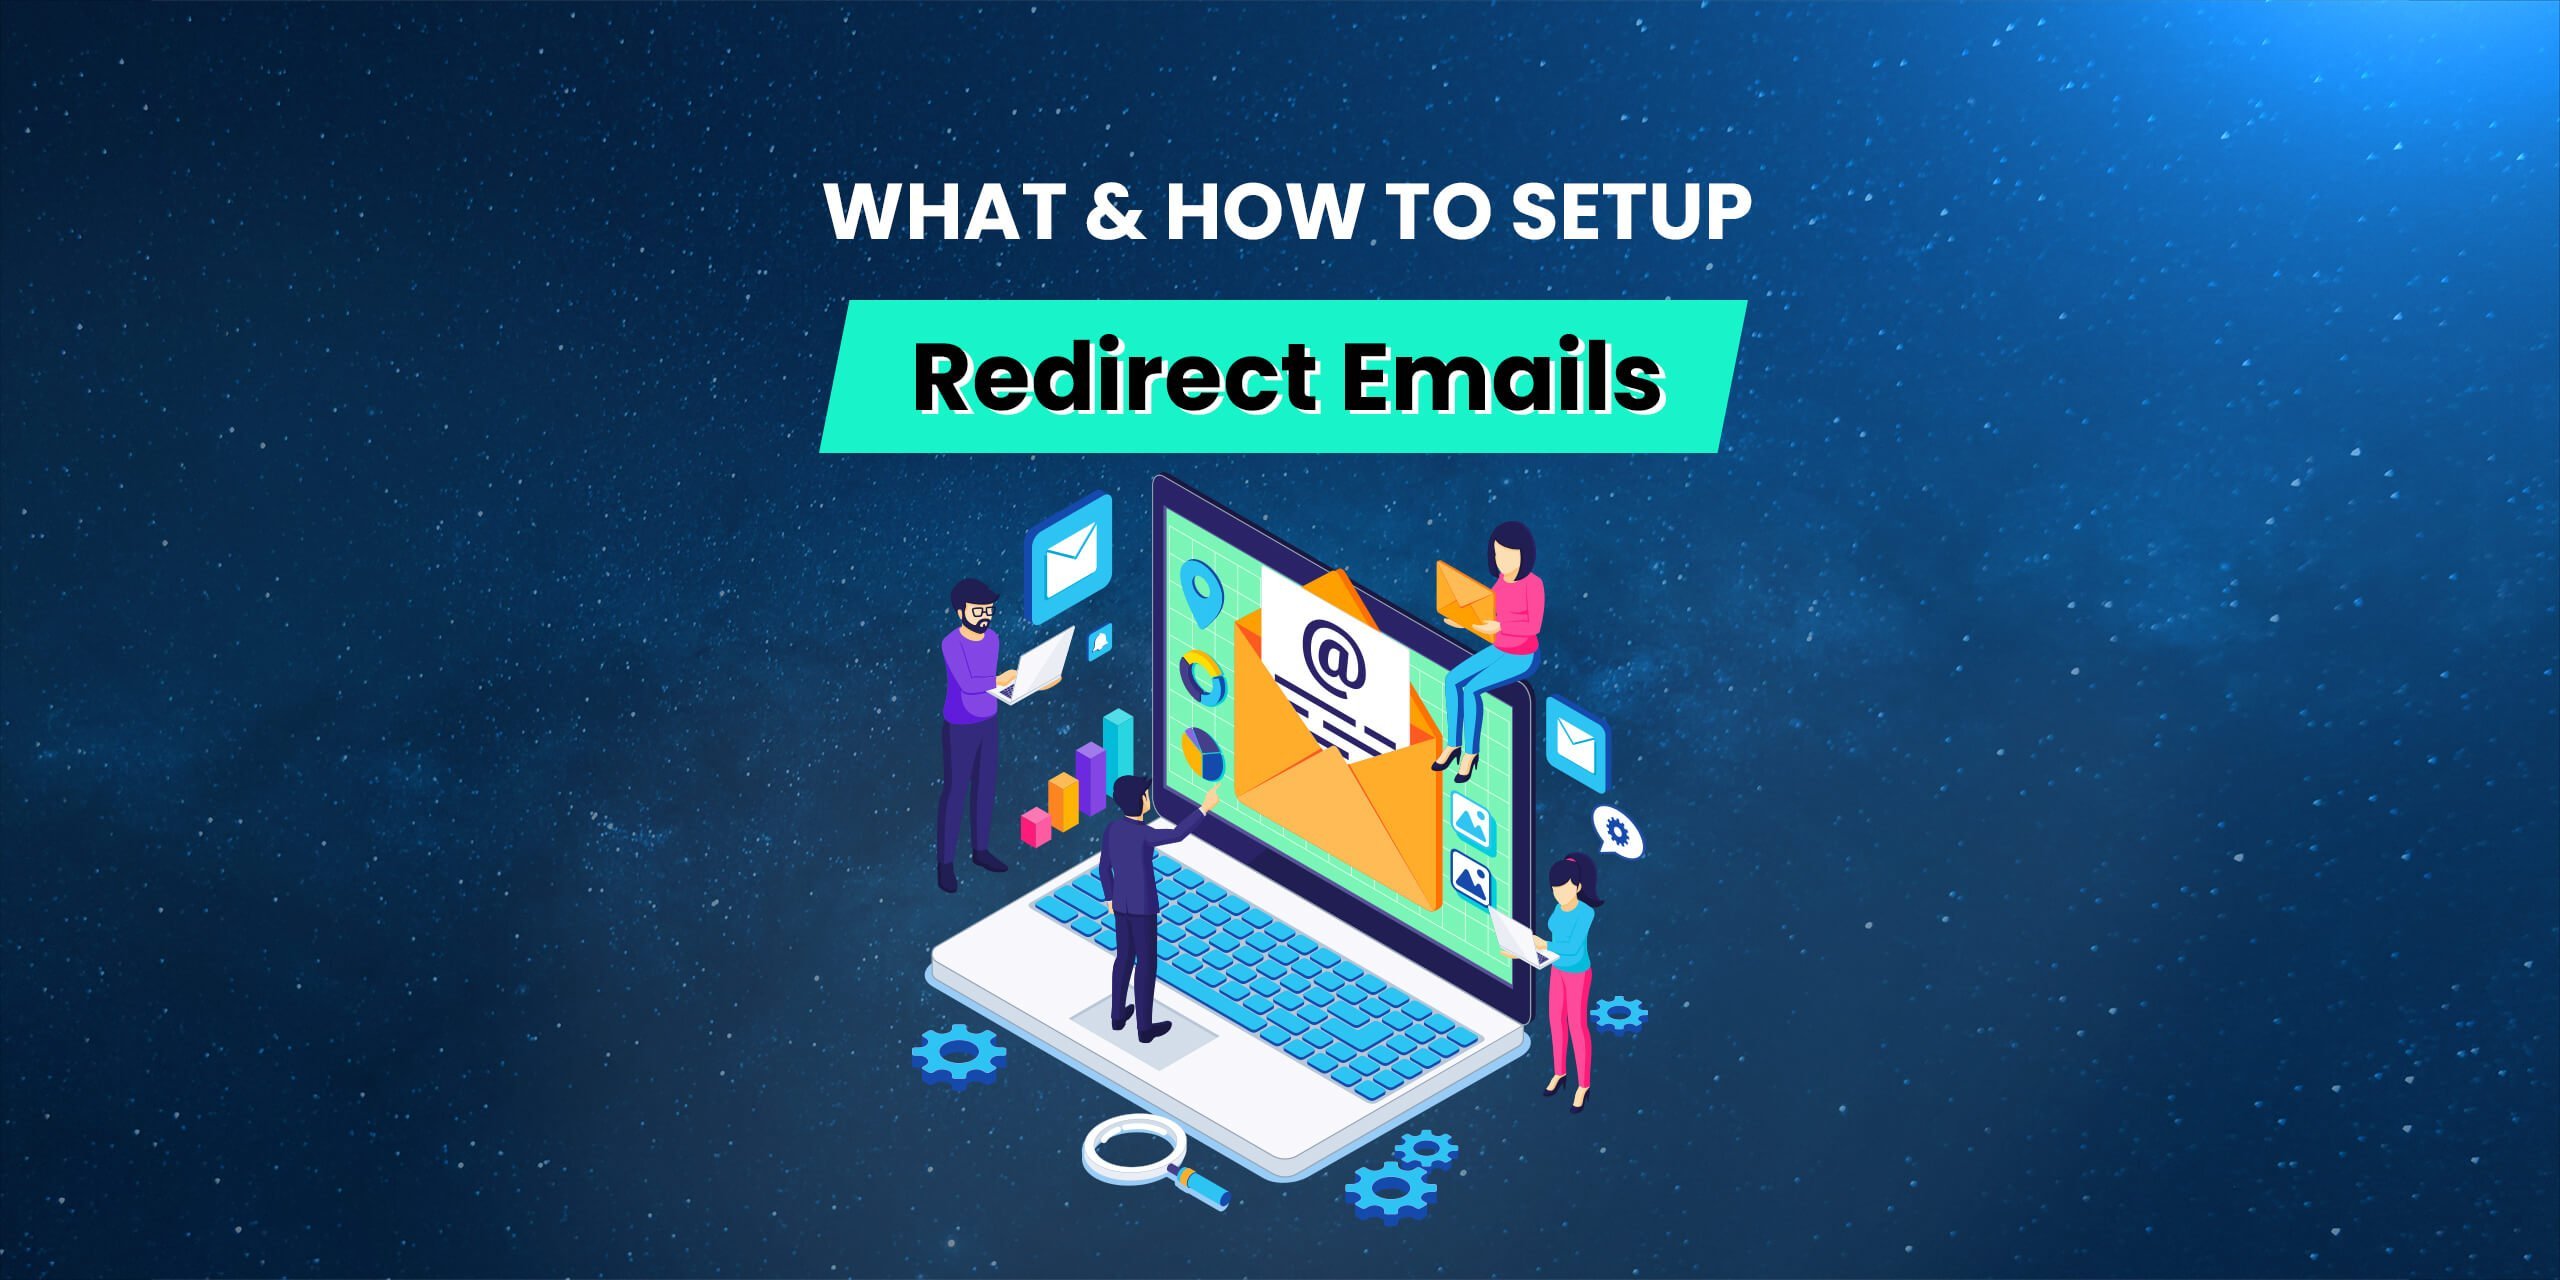 What & How to setup Redirect Emails